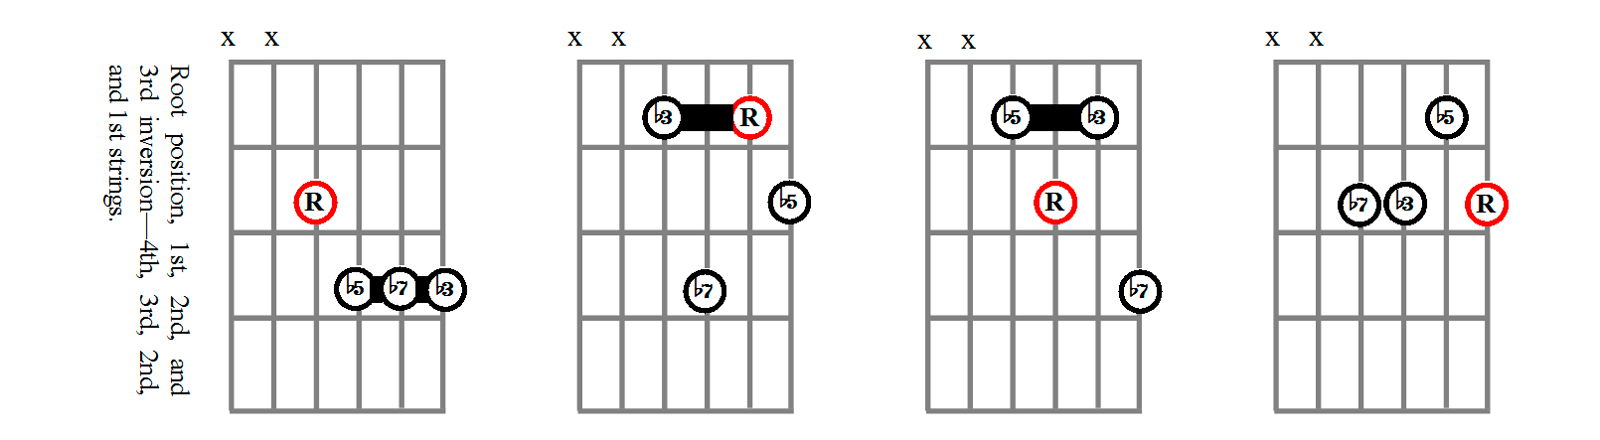 Minor Seventh Flat-Five Chord Shapes Using the 4th, 3rd, 2nd, and 1st Strings